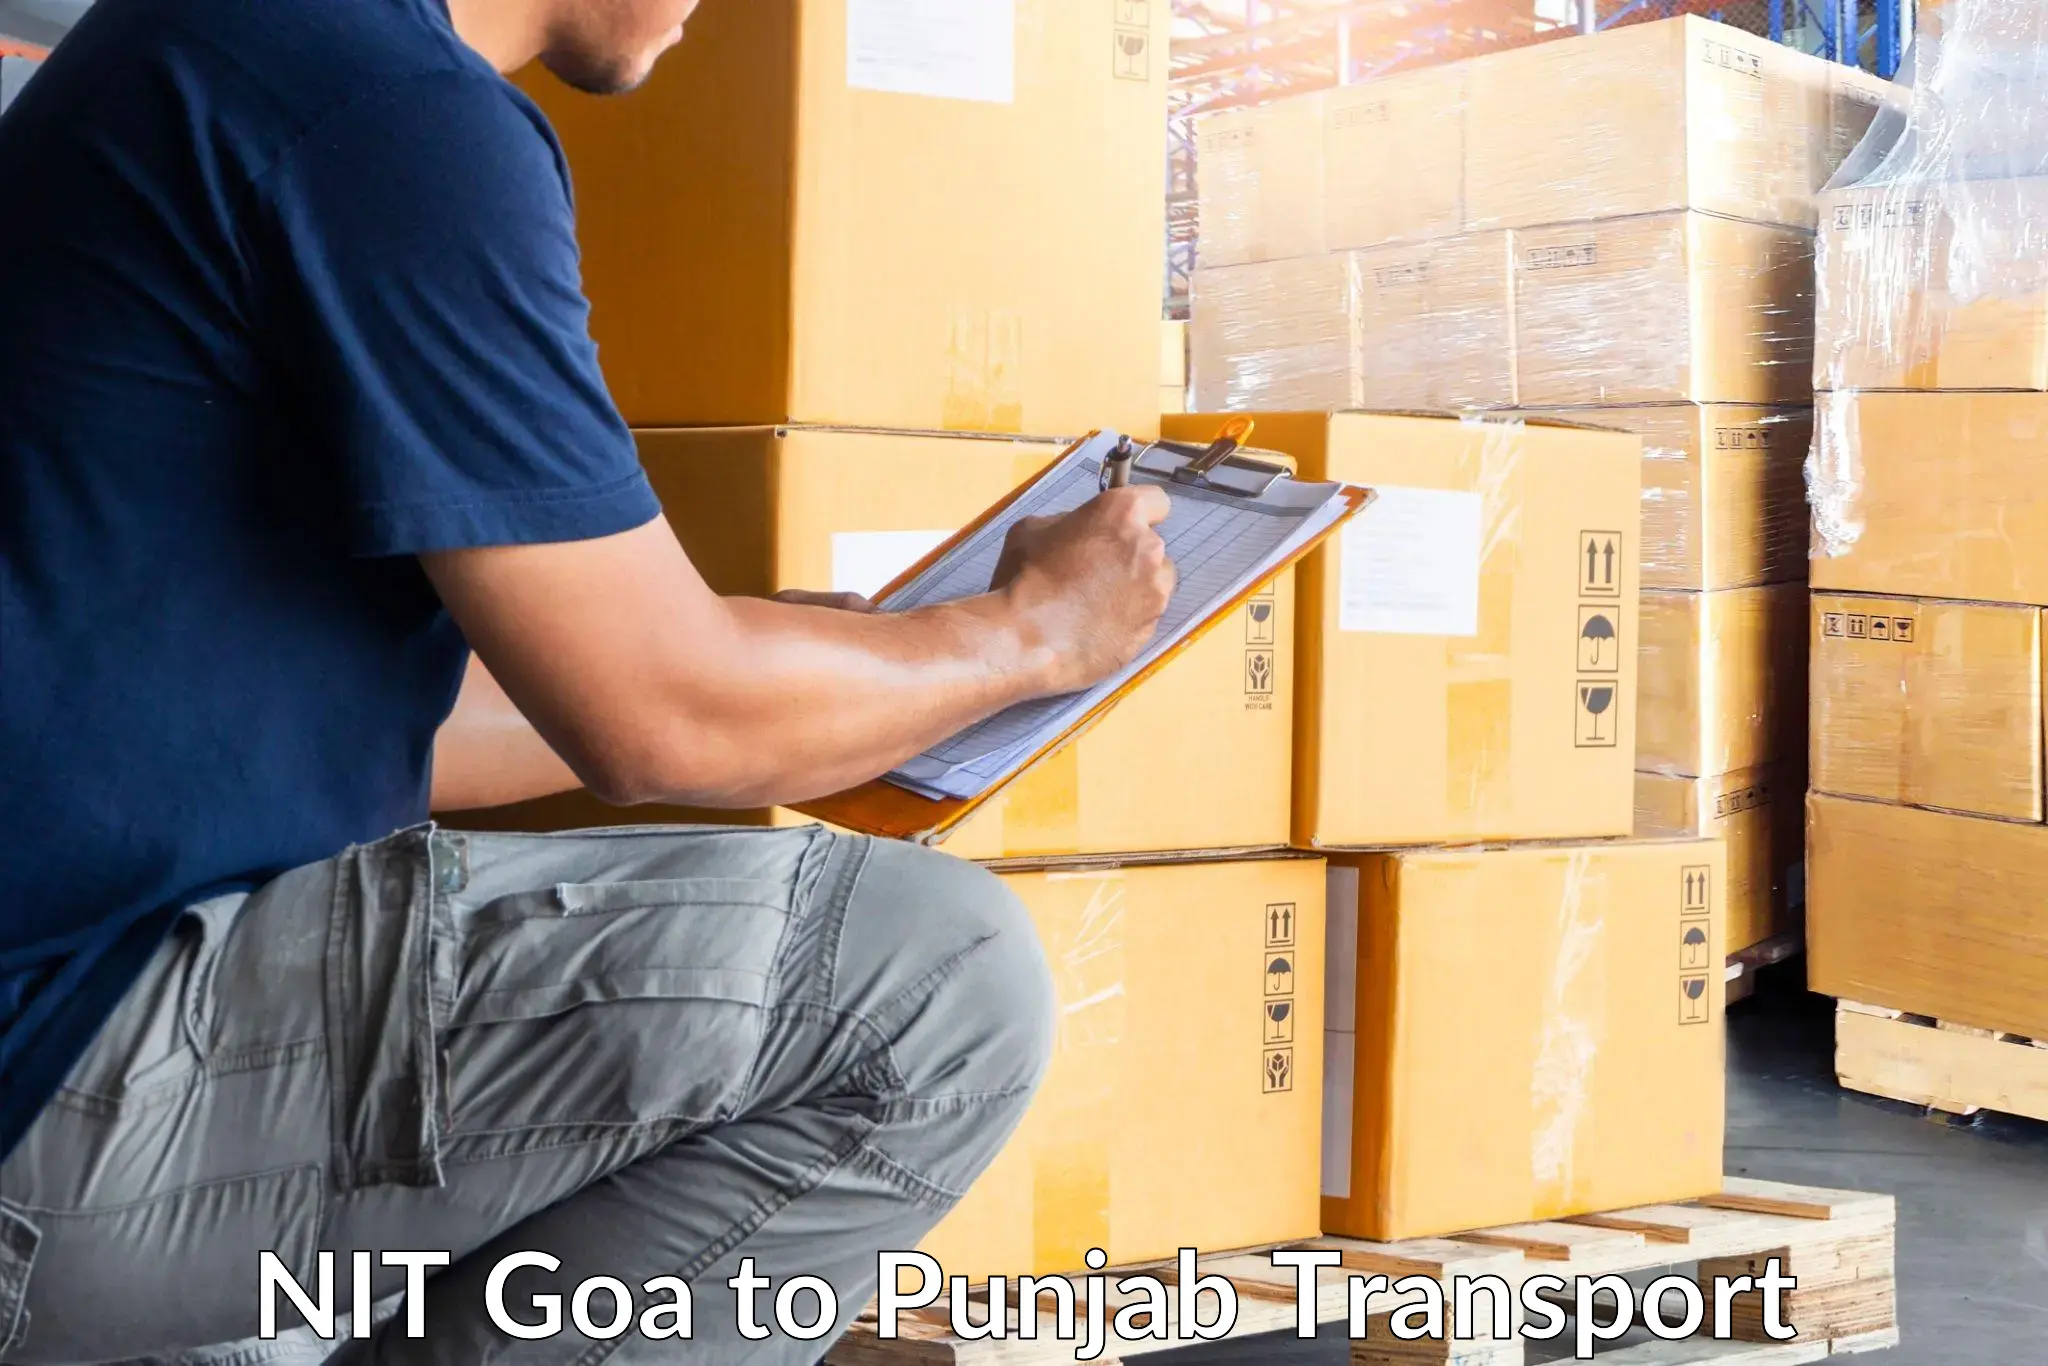 Pick up transport service in NIT Goa to Barnala